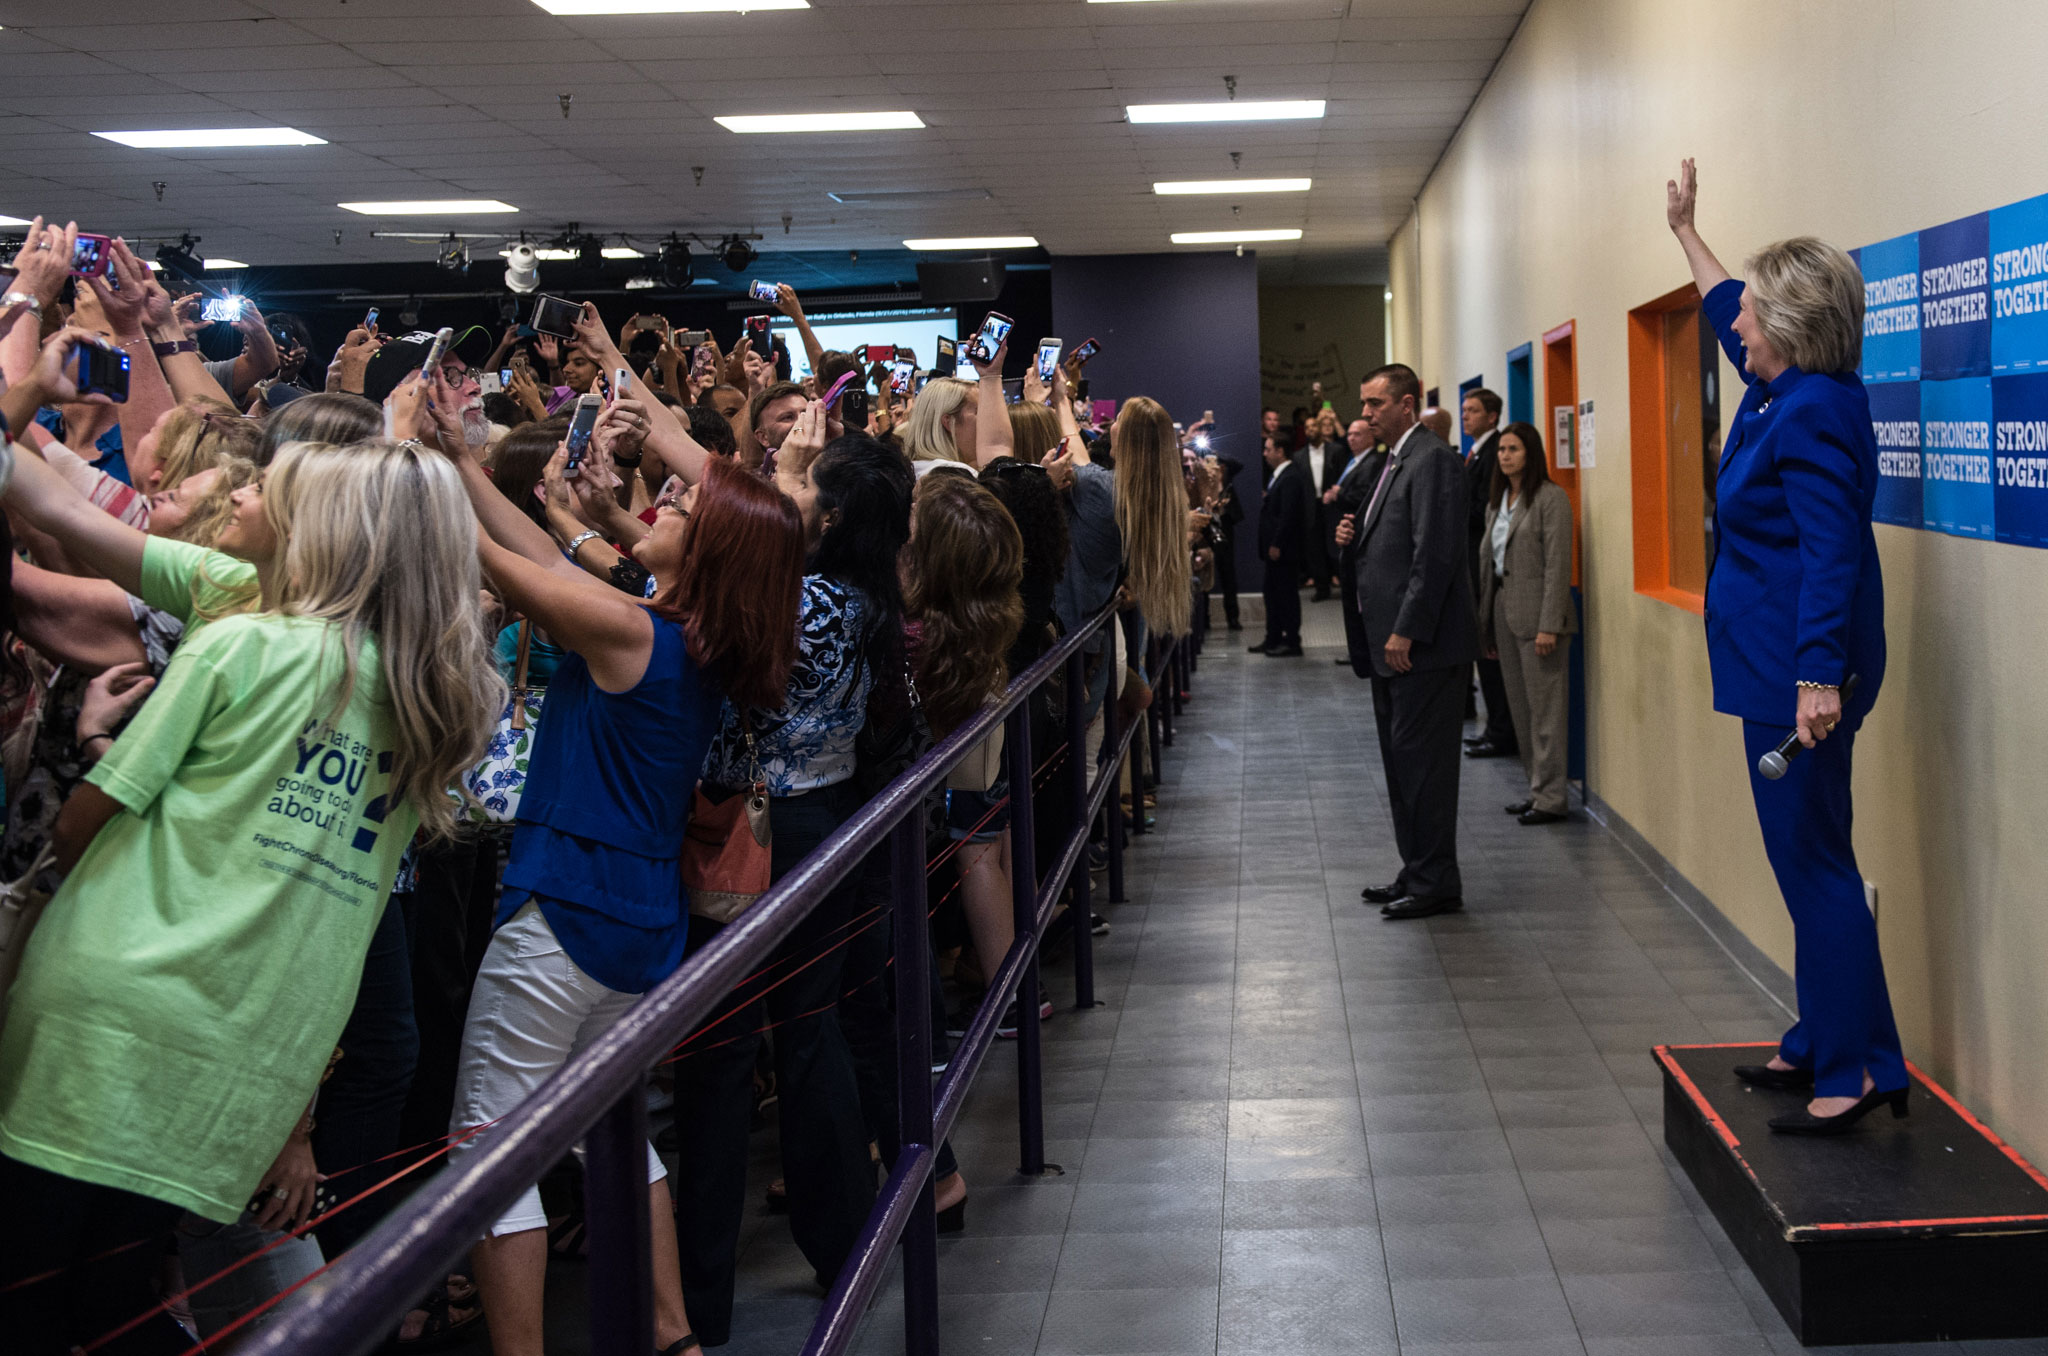 Hillary Clinton poses for selfies at an Orlando, Fla., event on Sept, 21, 2016. (Barbara Kinney—Hillary for America)